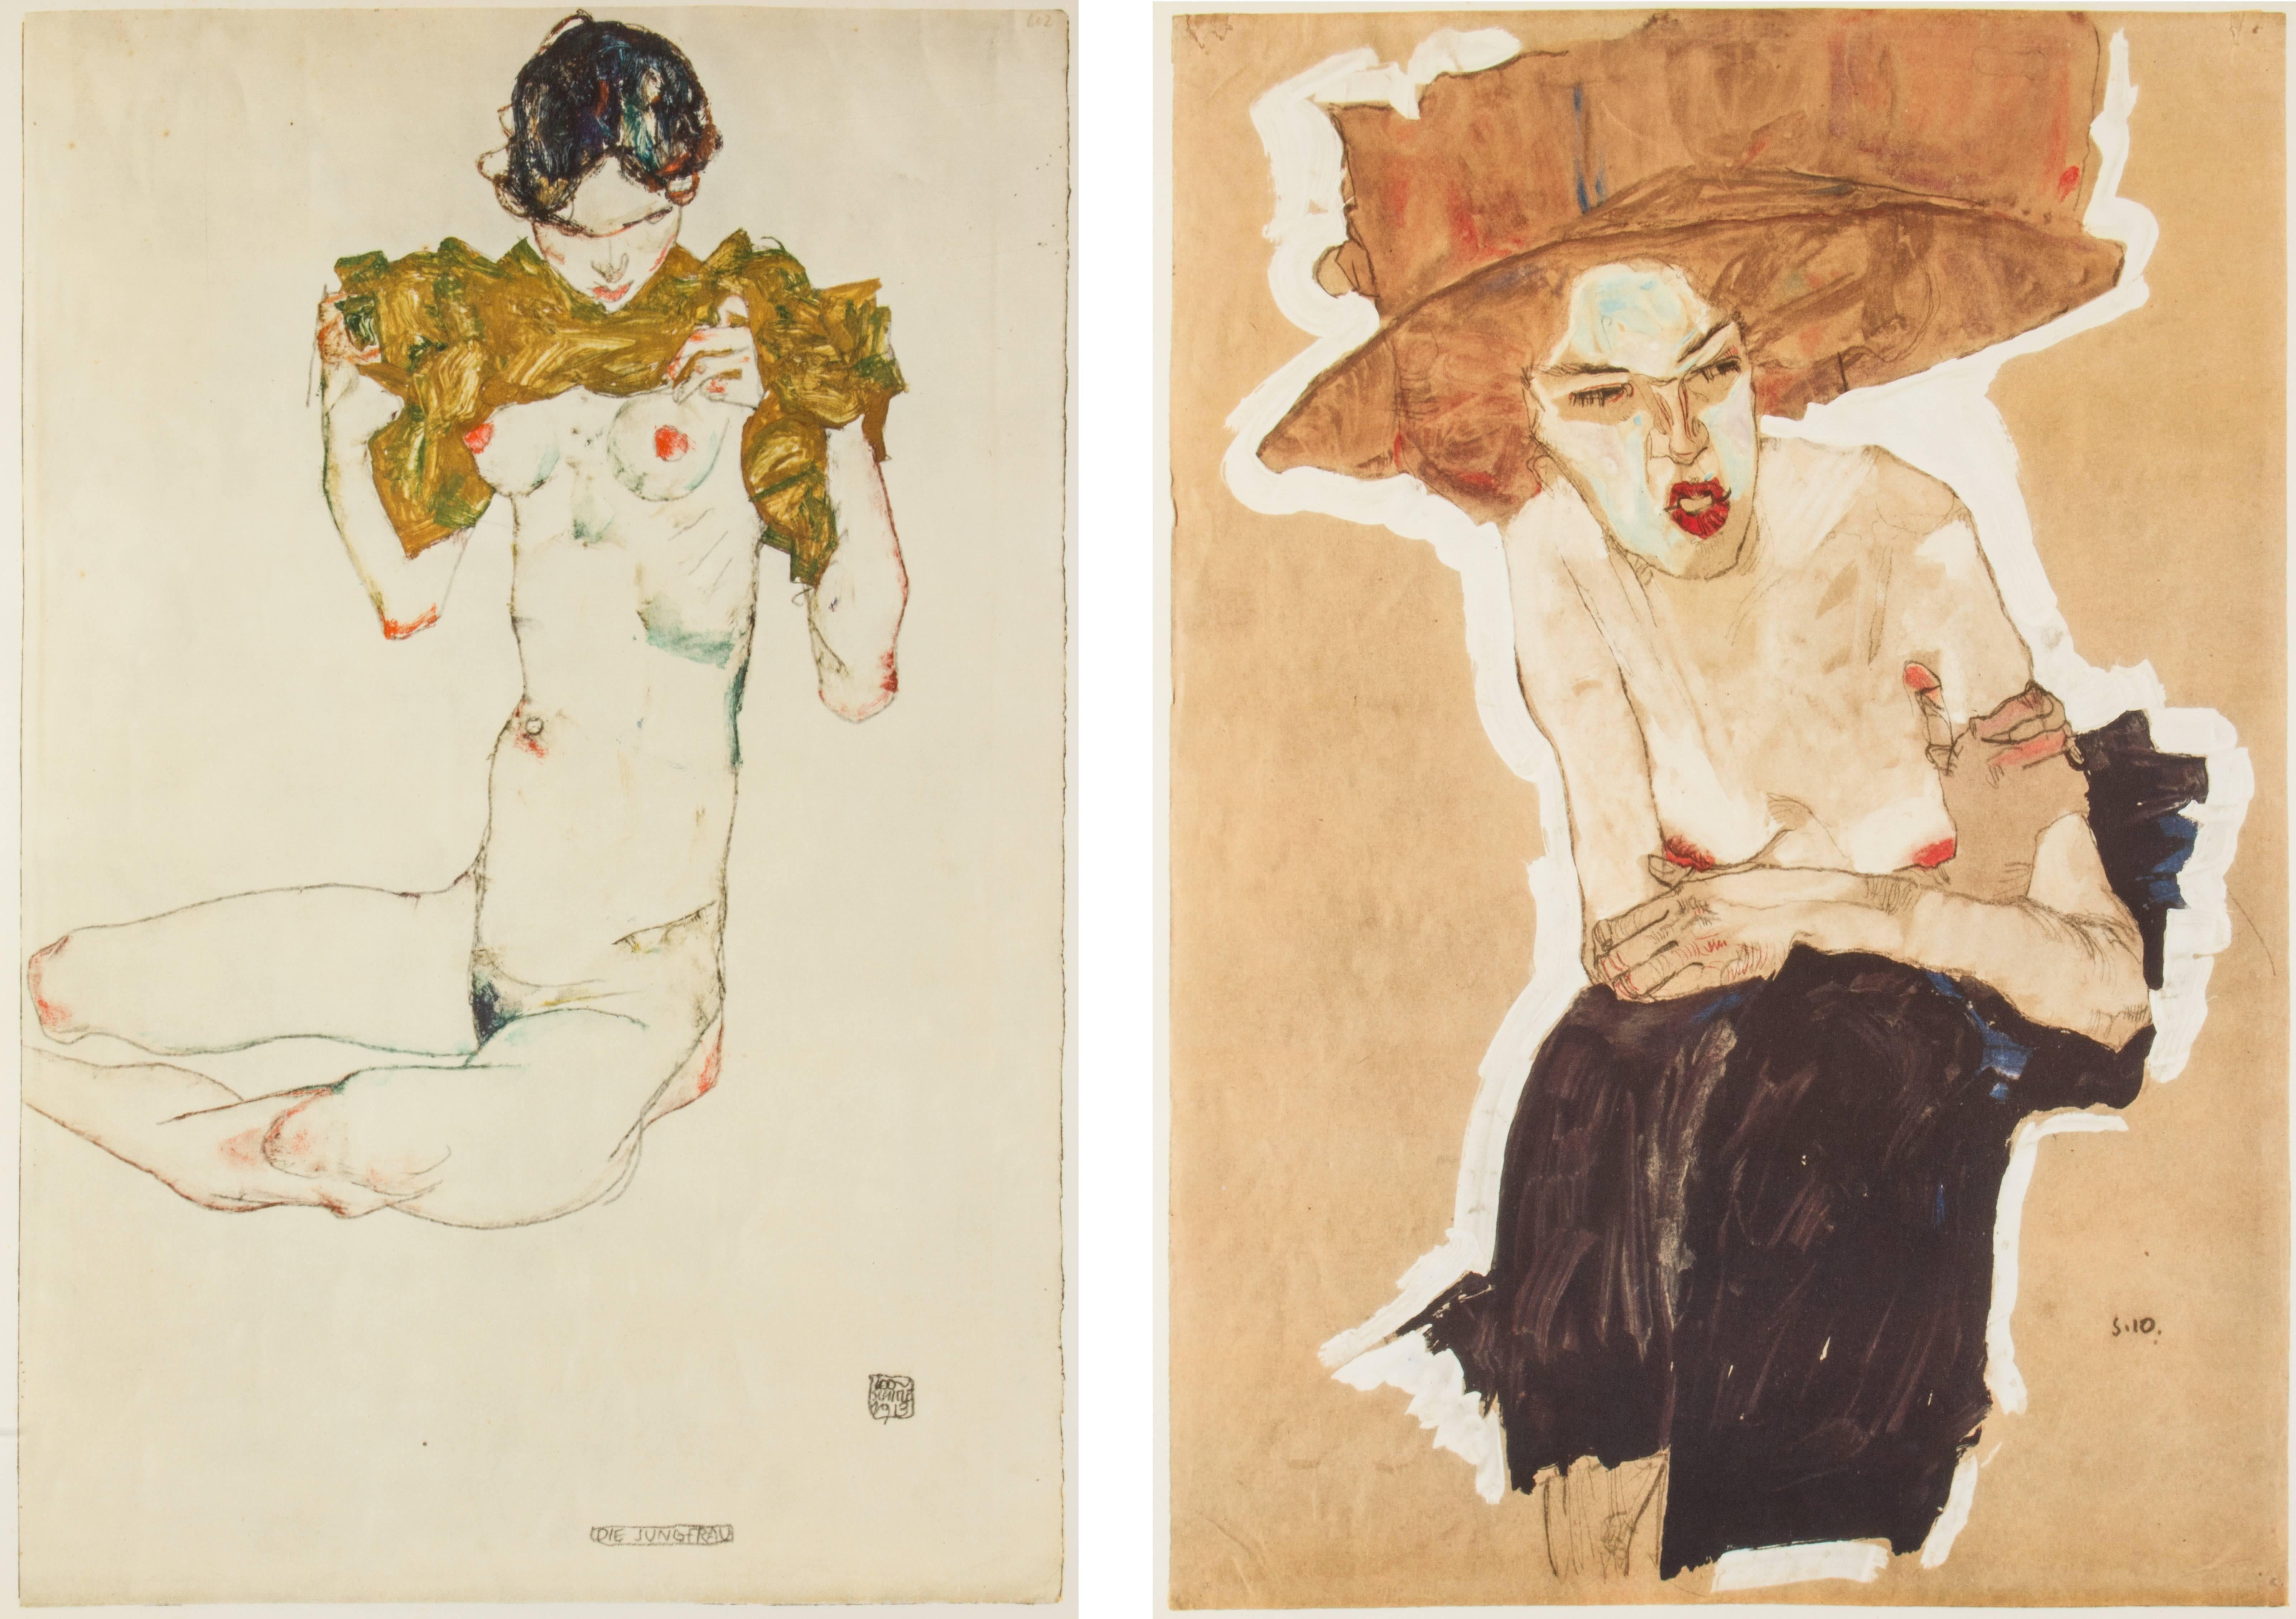 A hardcover bound, large format book containing introductory text and 64 collotype prints, most are in color, of Egon Schiele's watercolors and drawings.
Schiele's artistic talent was apparent very early age and was admitted to the Vienna Academy